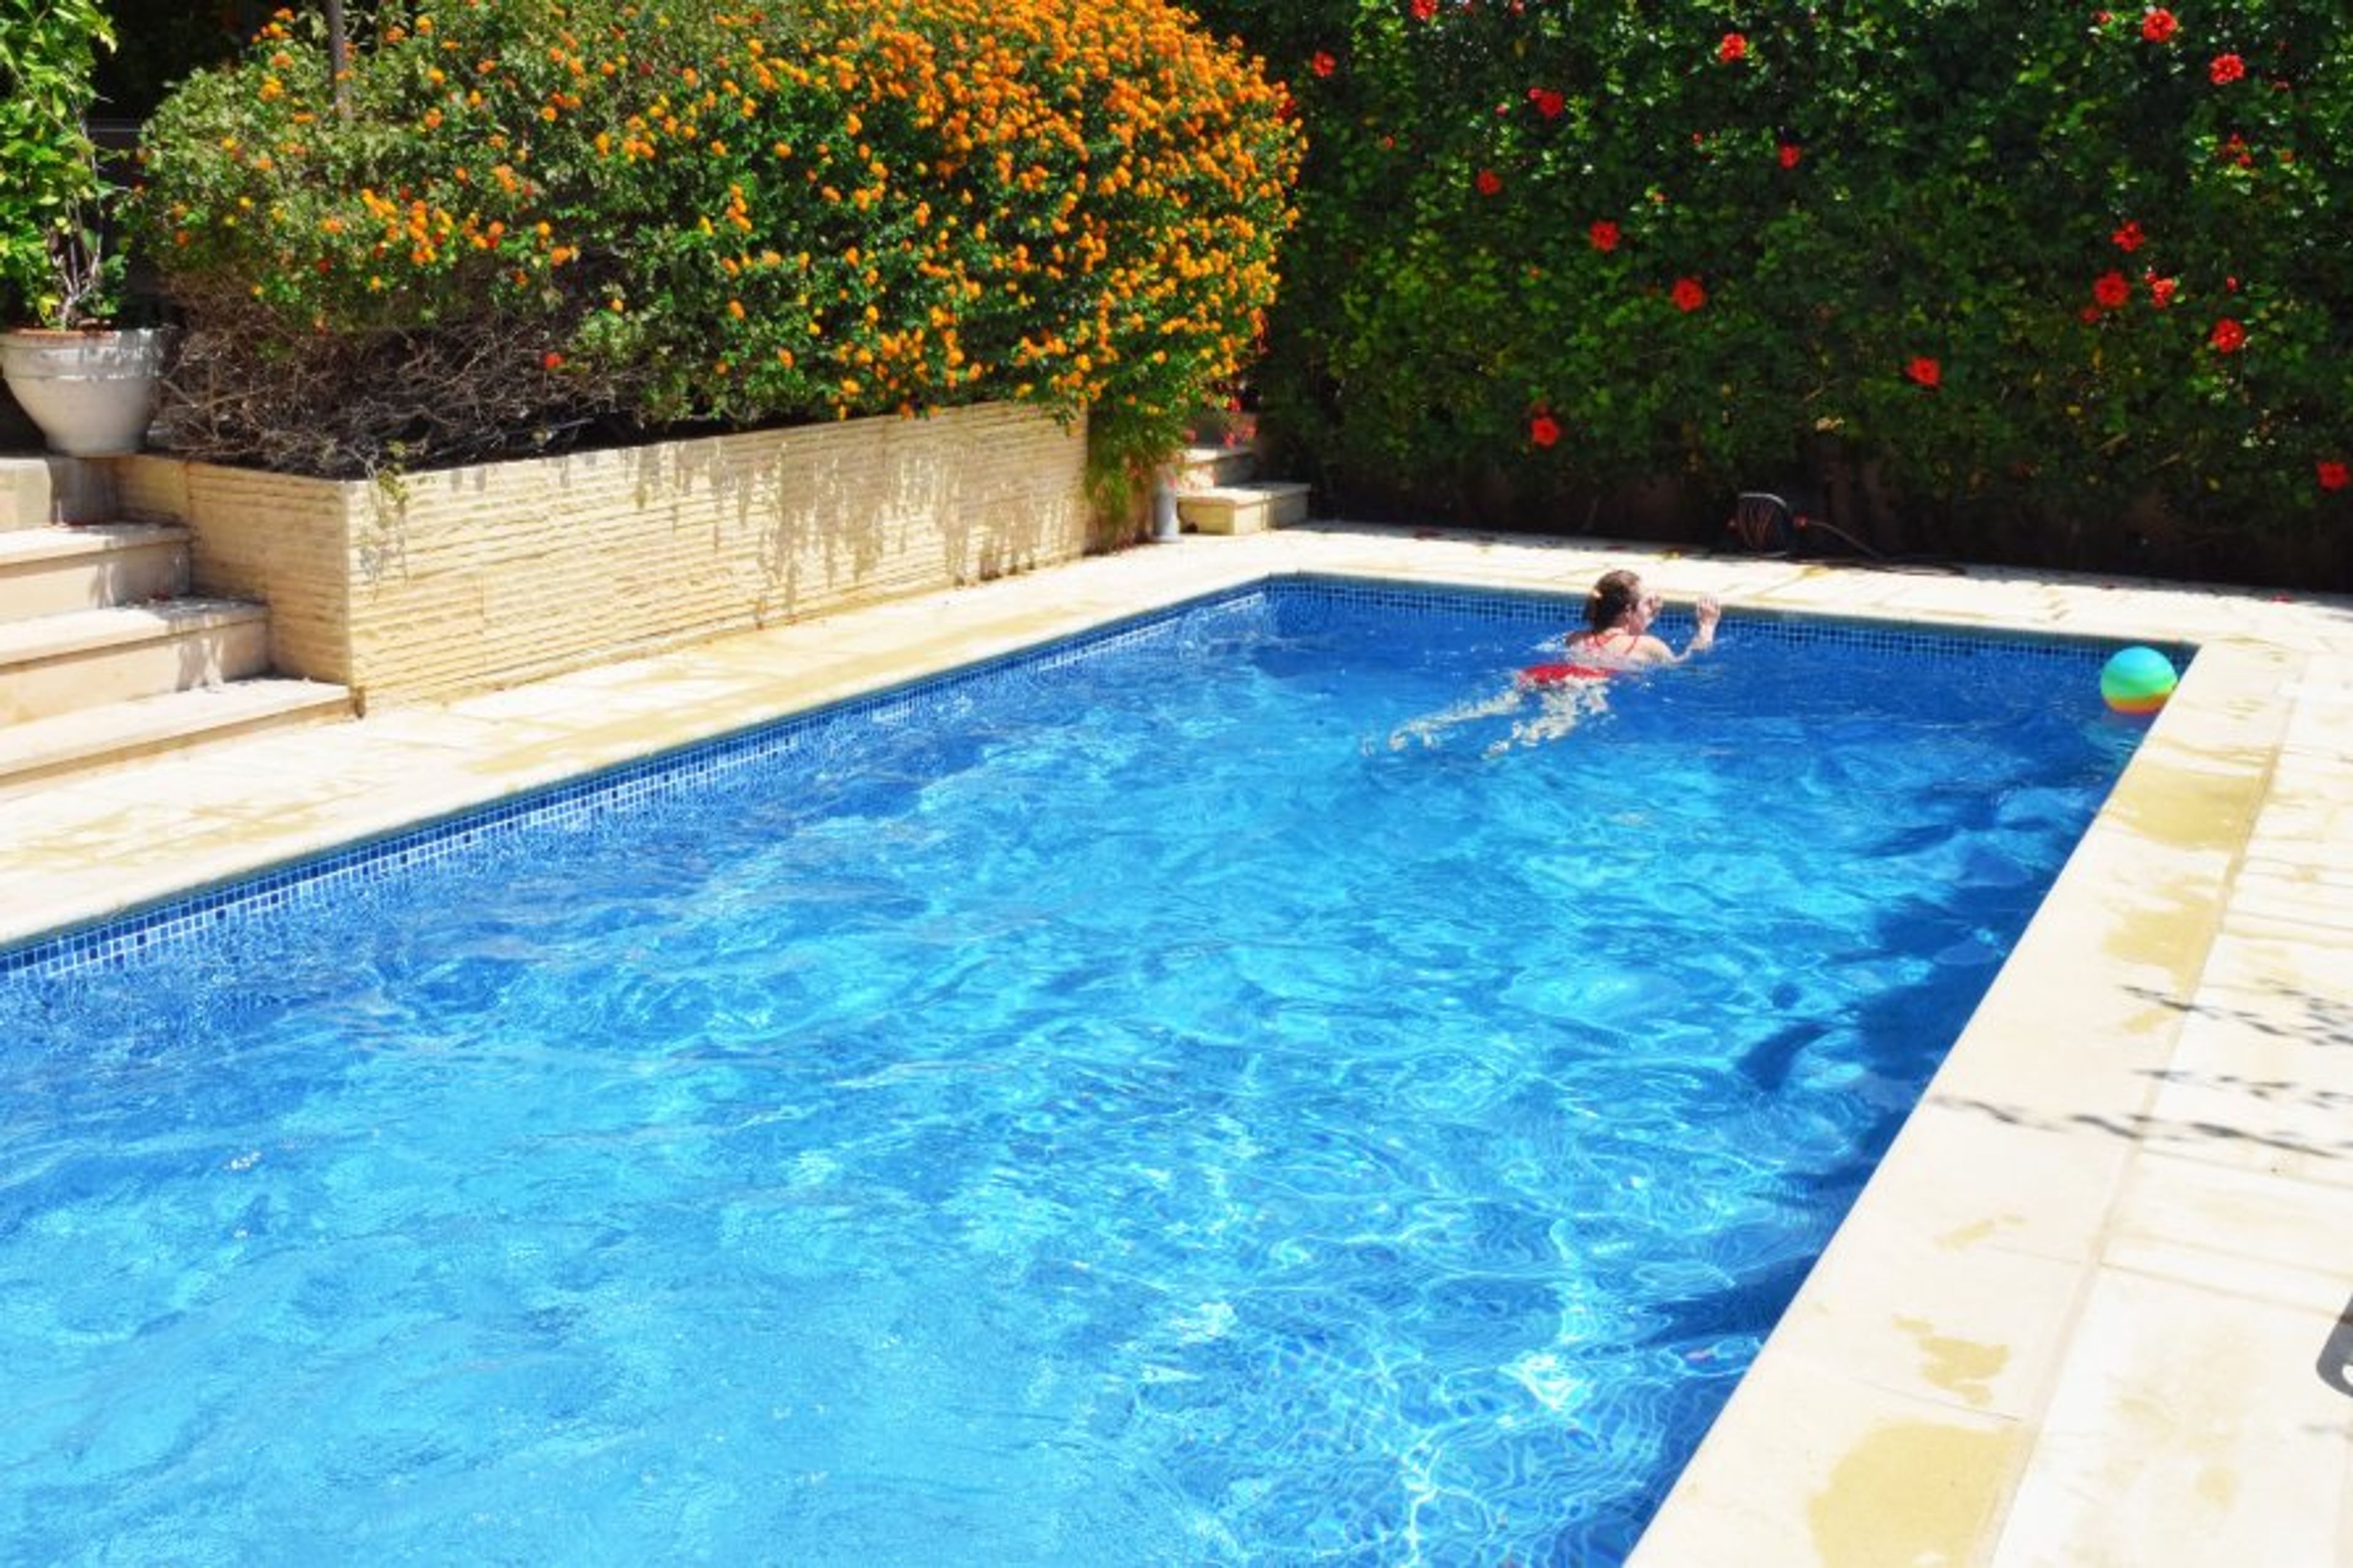 Pool surrounded by mature garden providing privacy and seclusion